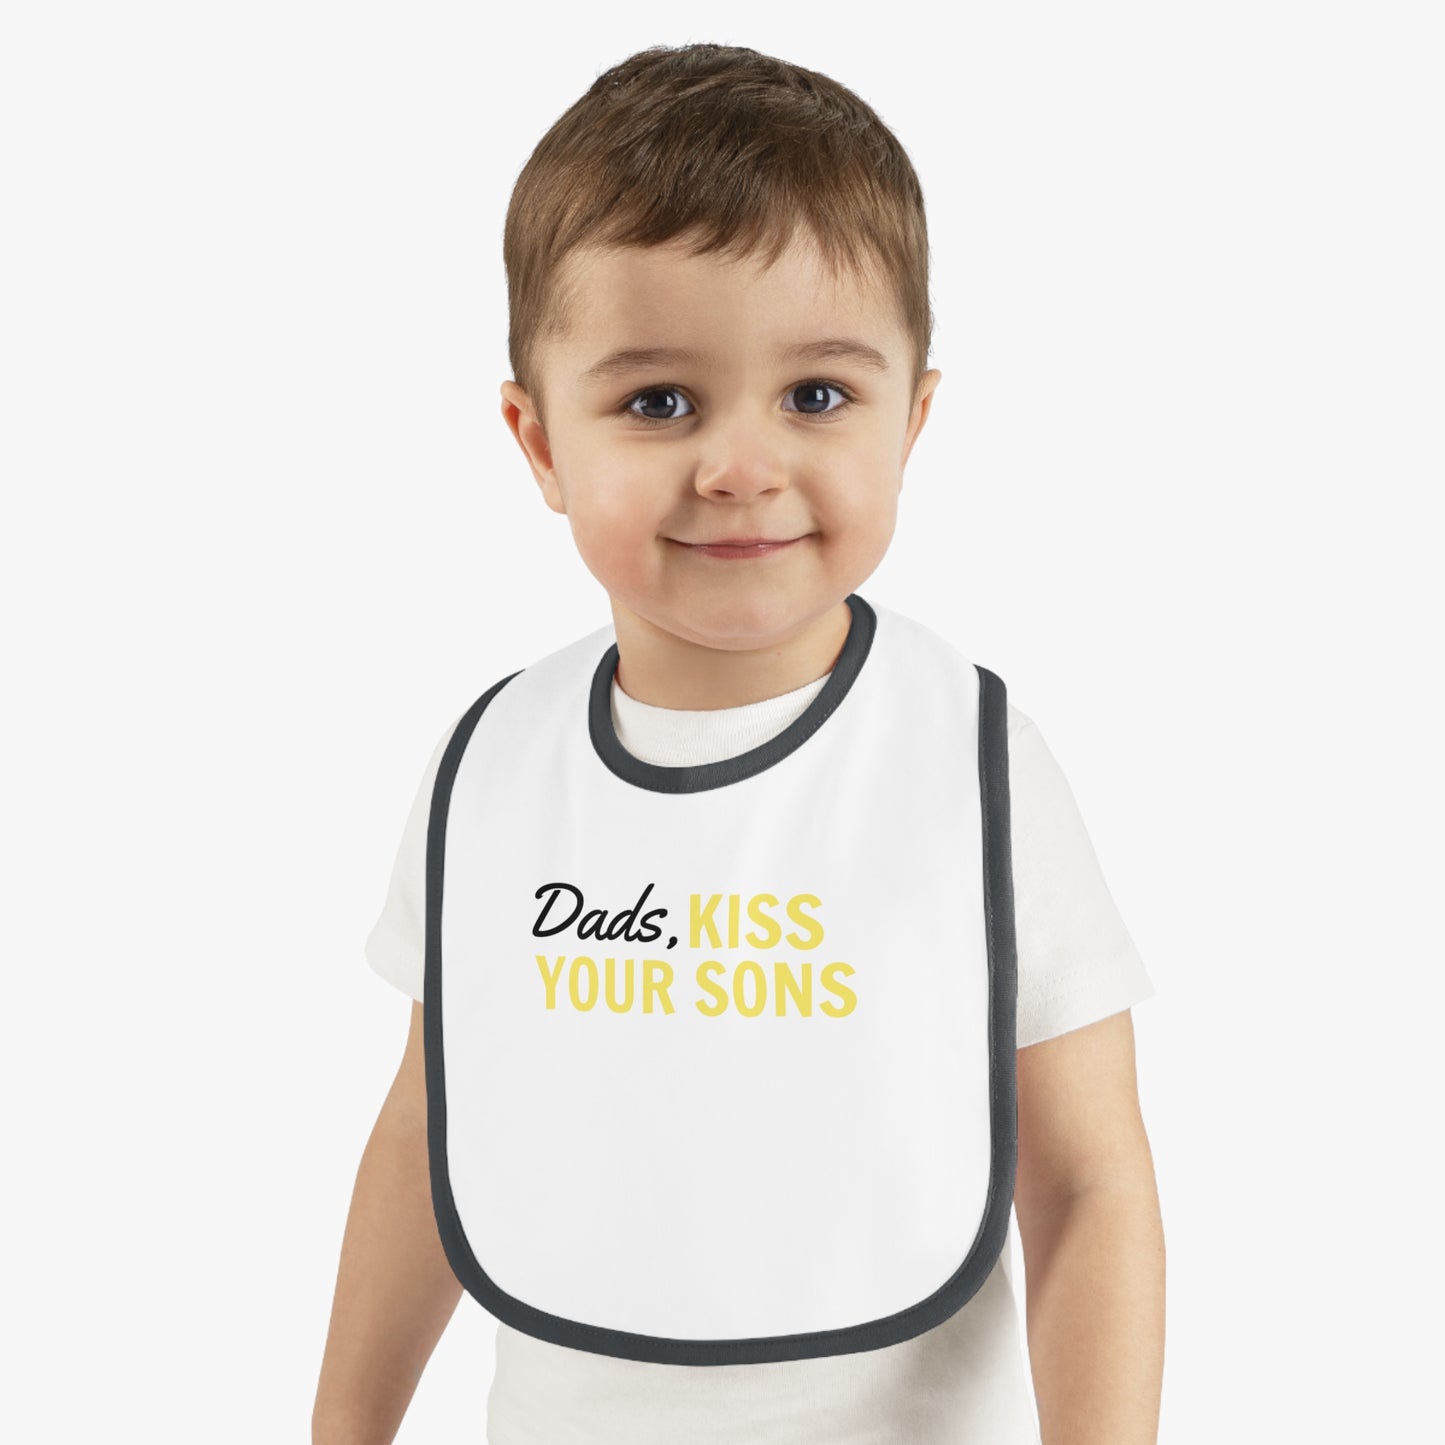 Dads, Kiss Your Sons Bib